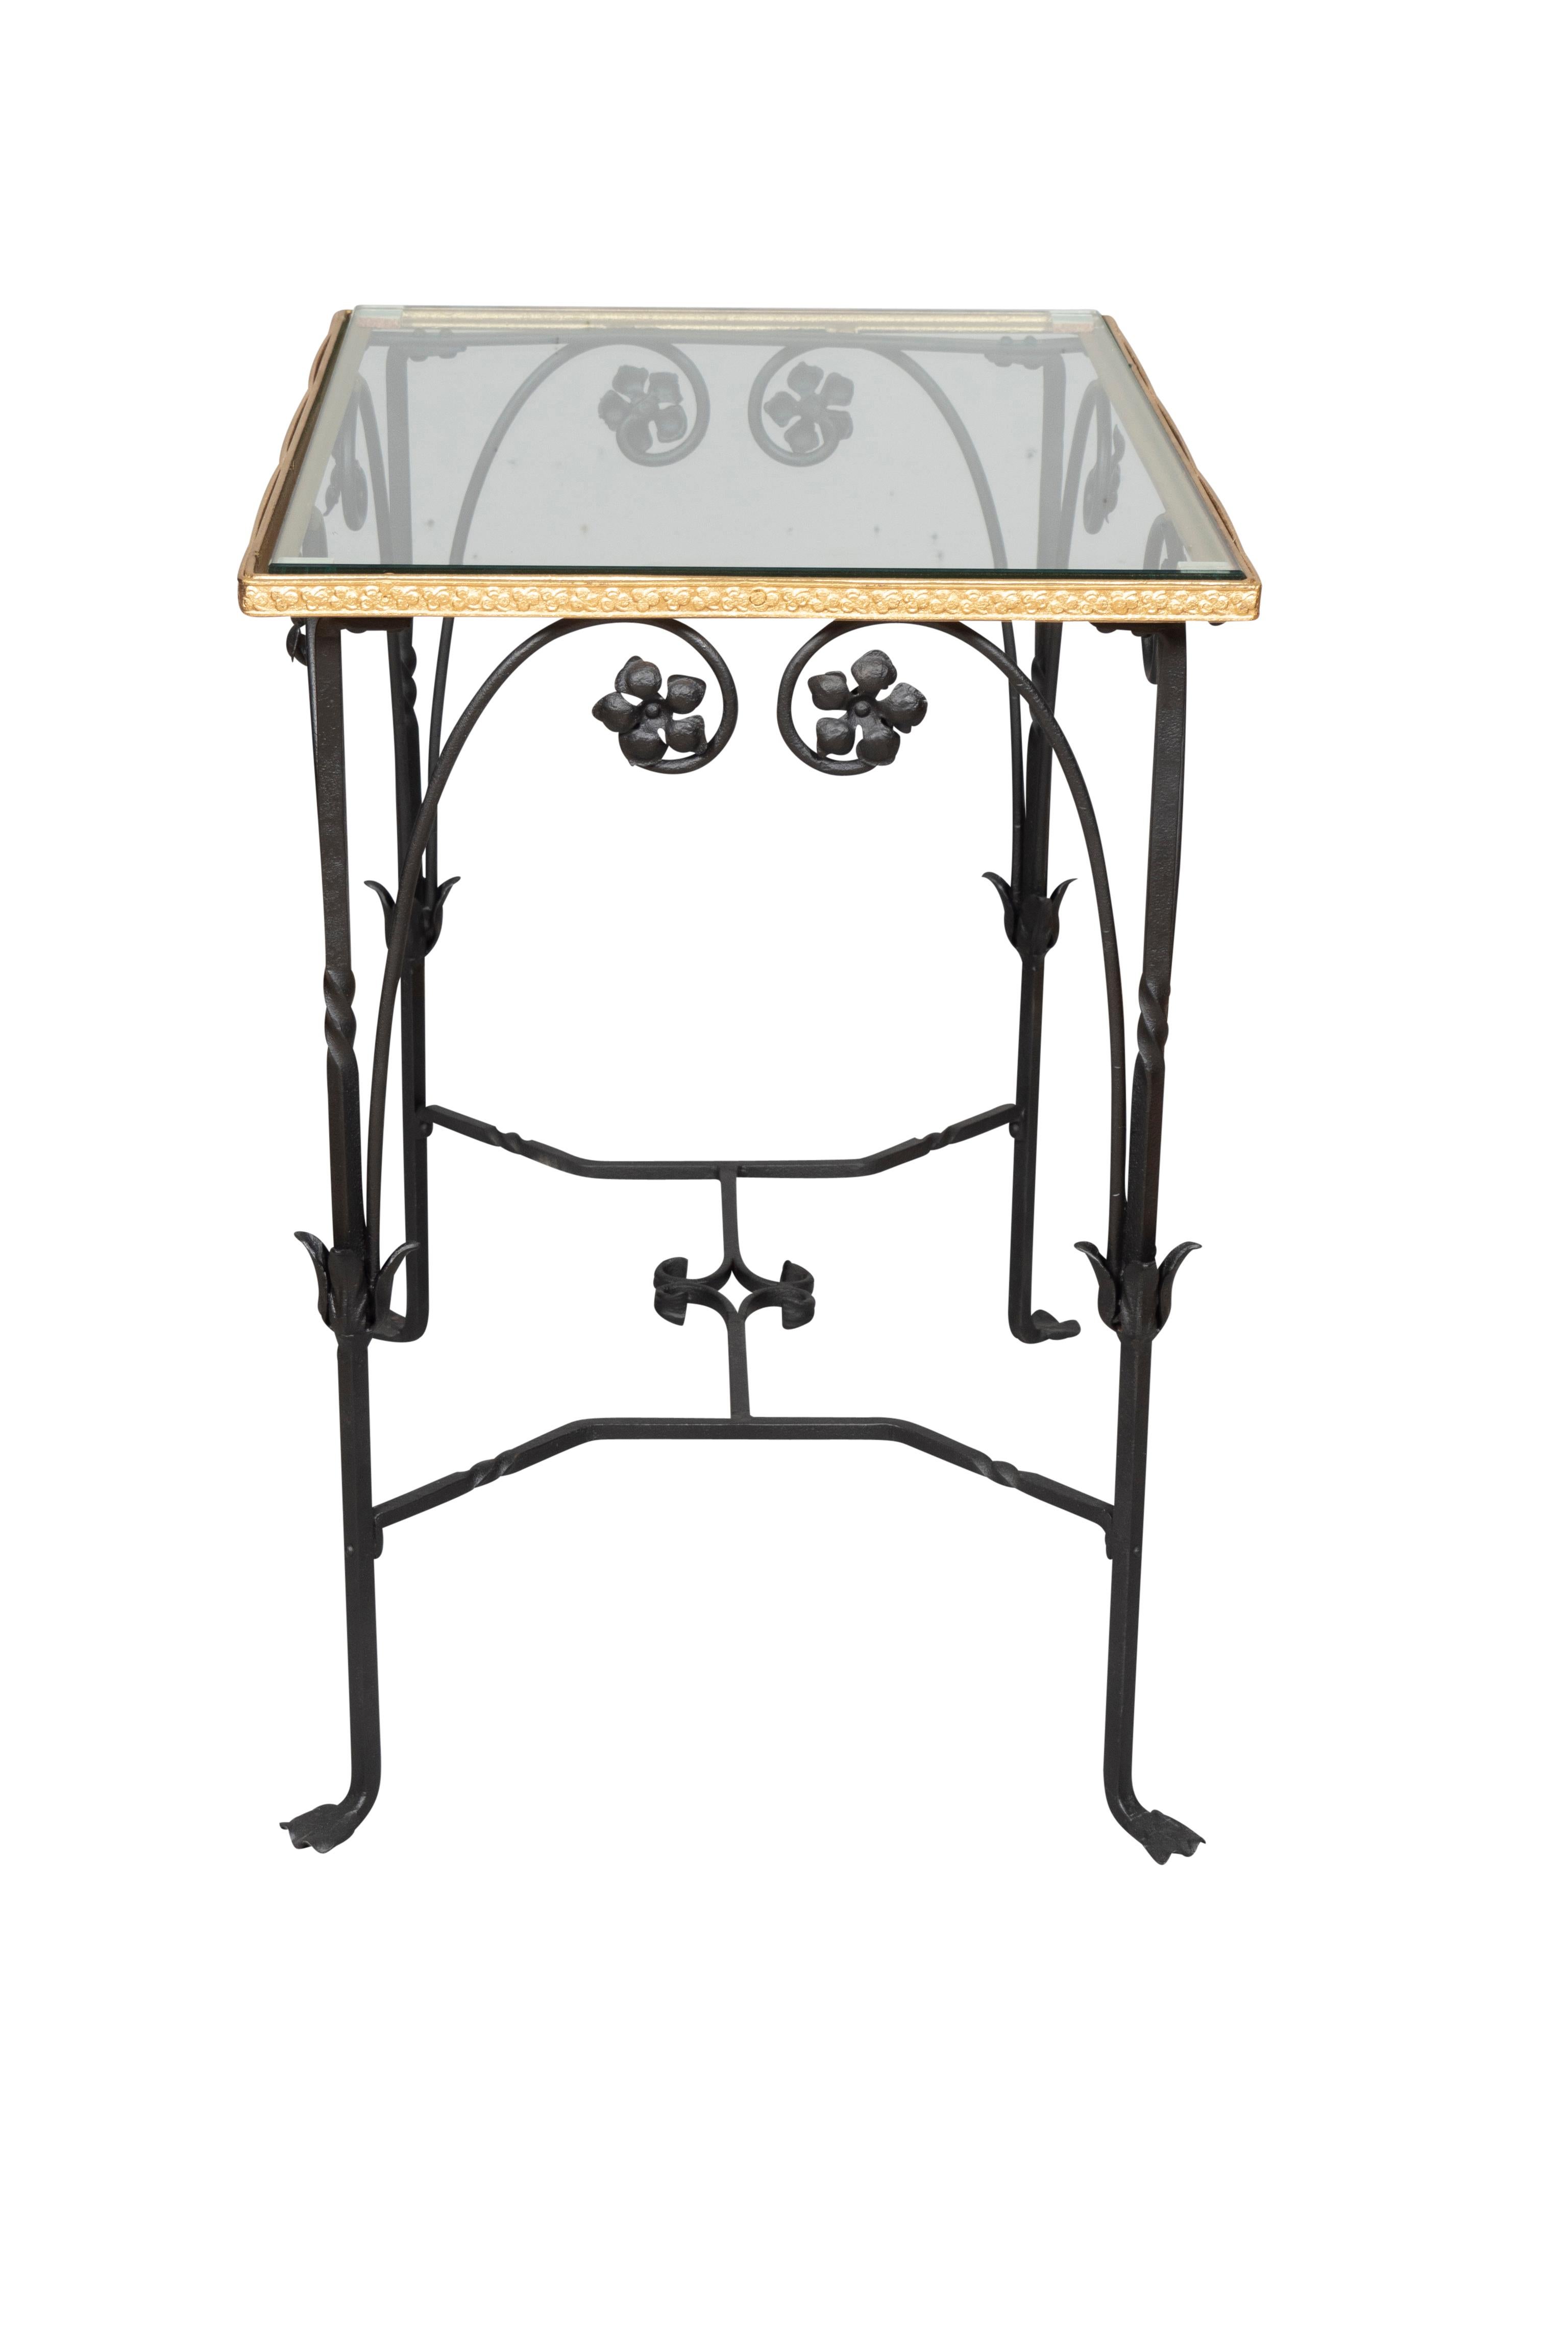 American Arts and Crafts Wrought Iron Table